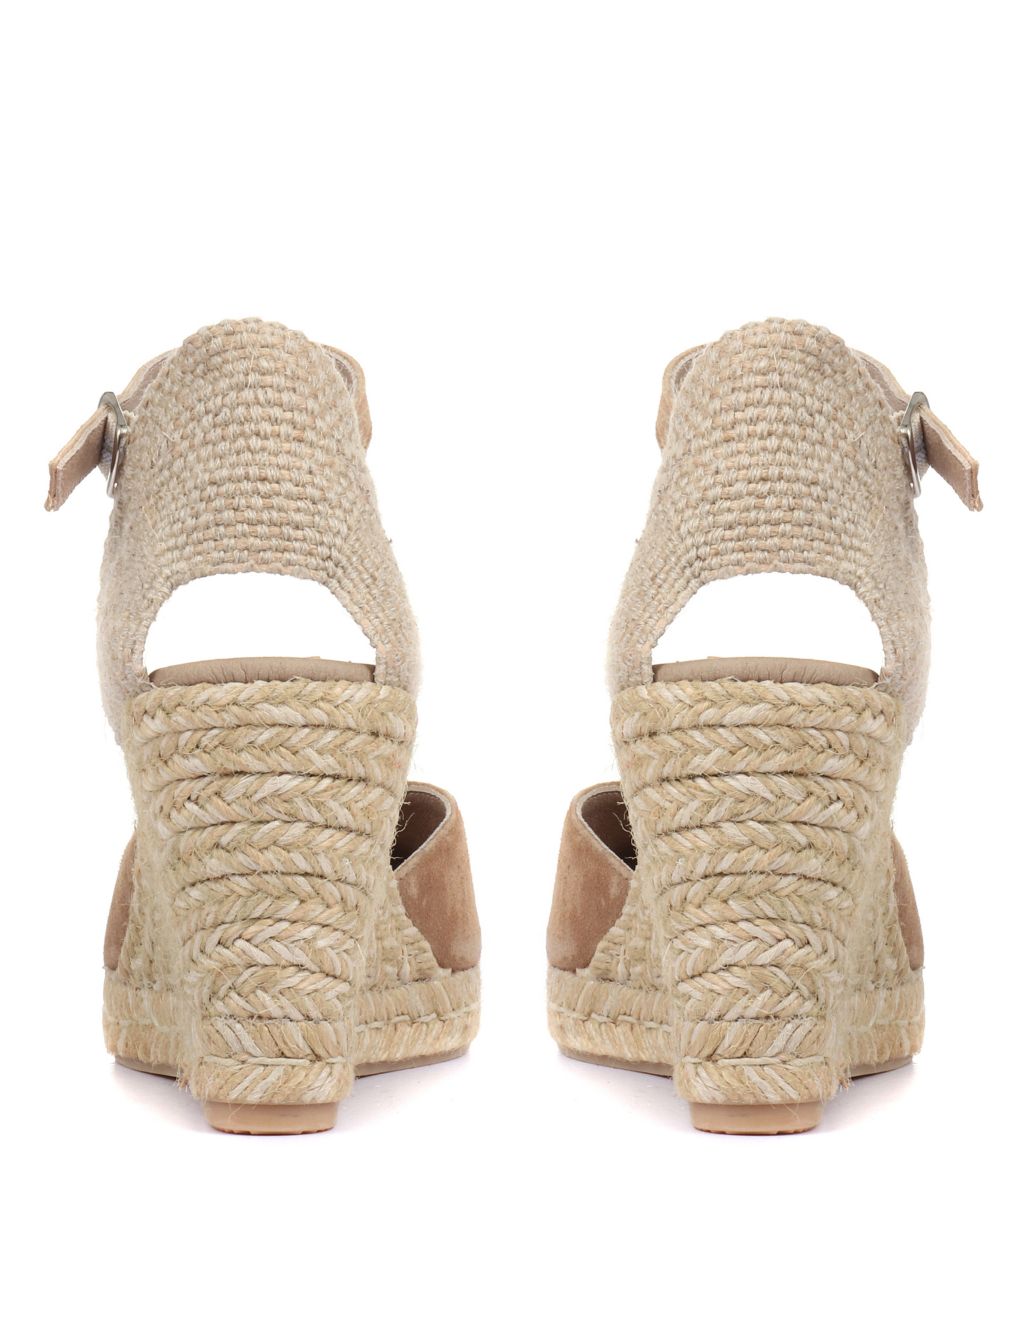 Suede Ankle Strap Wedge Espadrilles image 5